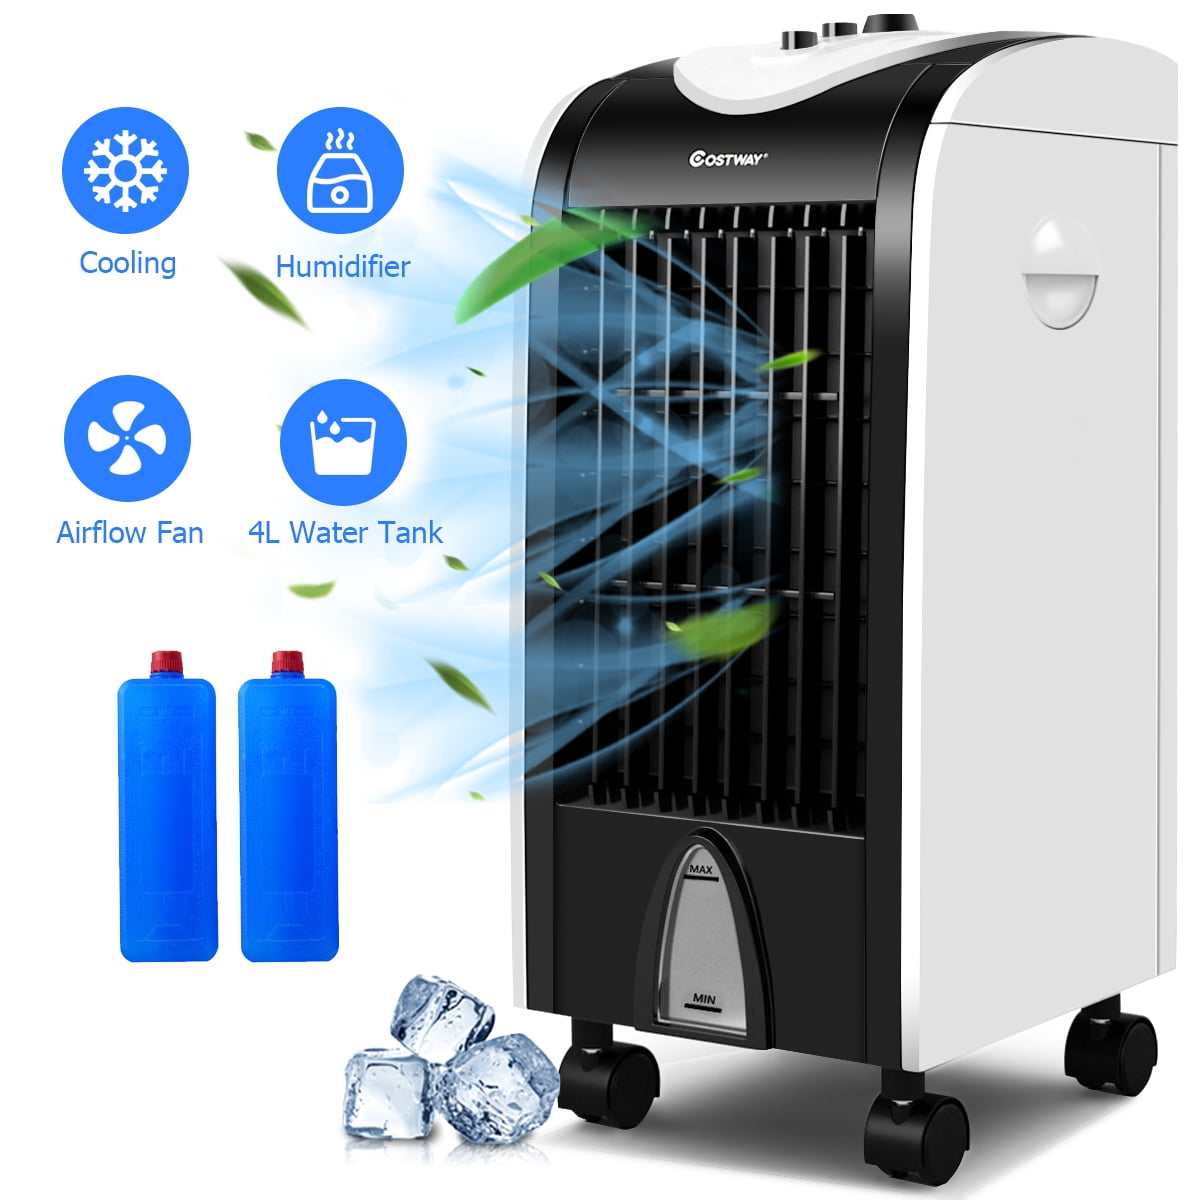 Gorilla Gadgets RNAB097F88L8G 800cfm evaporative cooler,air cooler 4-in-1  portable air cooling, humidifier and ionic, with 3 wind modes, 3 speeds,  12h time